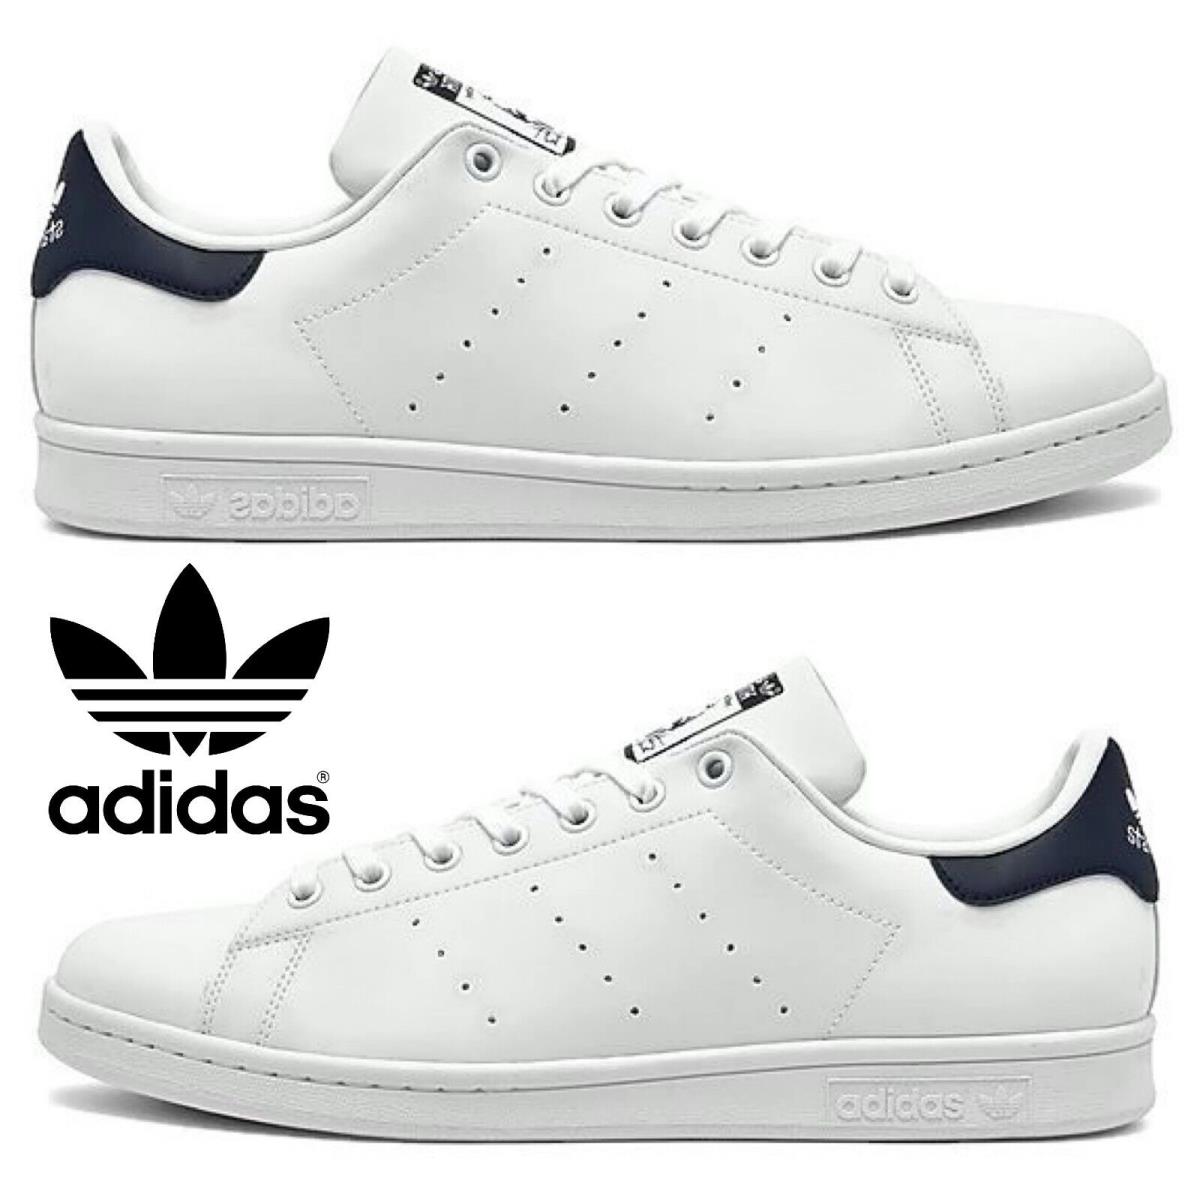 Adidas Originals Stan Smith Women s Sneakers Casual Shoes Sport Gym White Navy - White , Synthetic White/Collegiate Navy Manufacturer